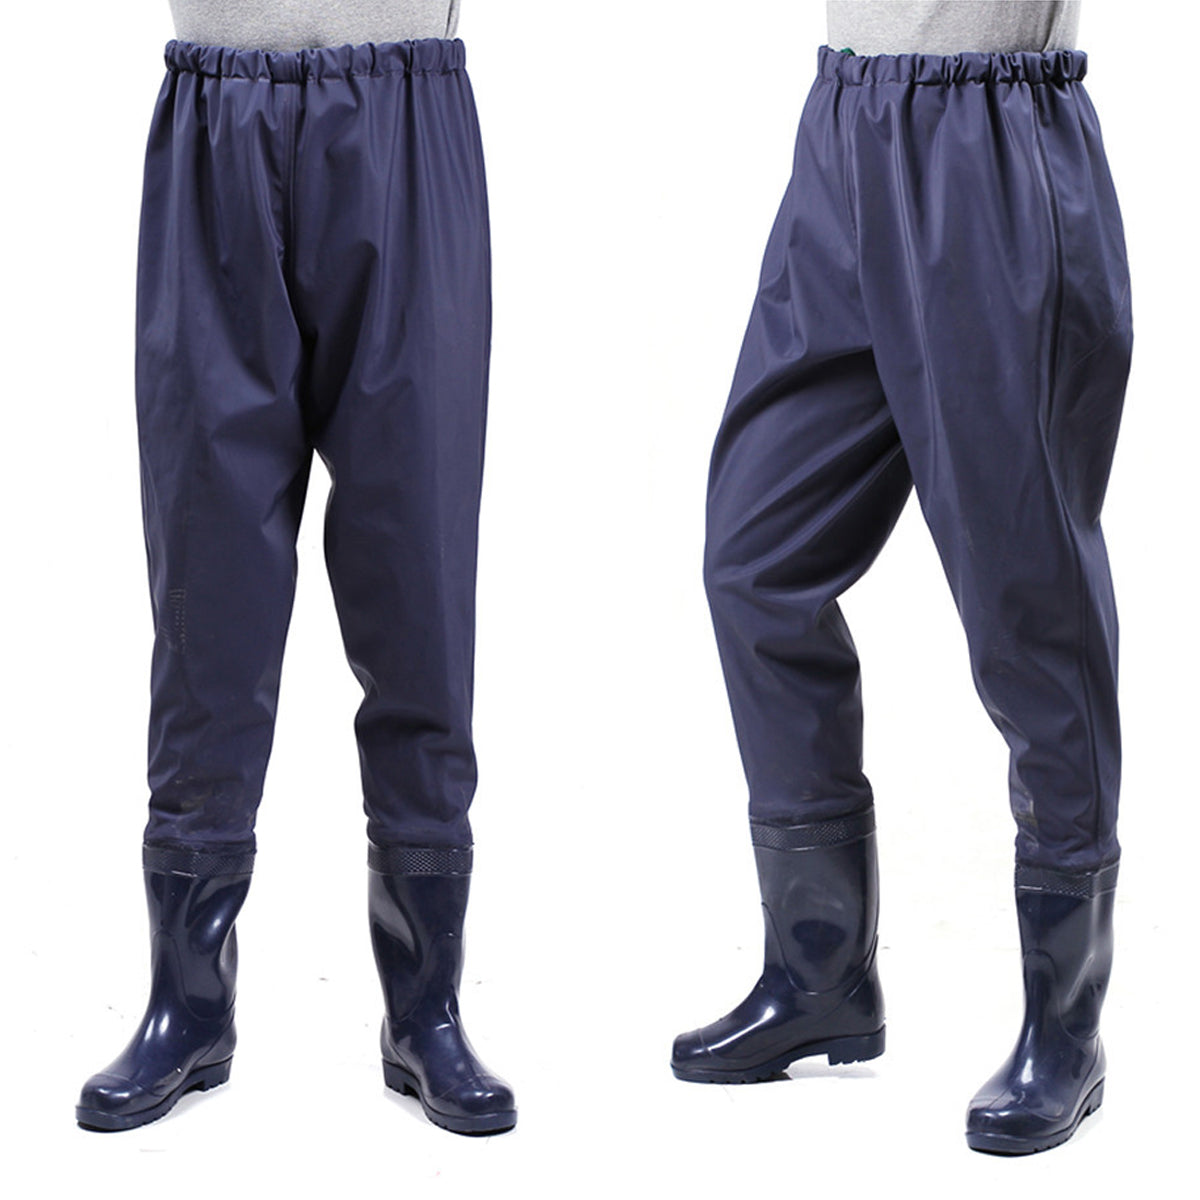 Unisex Waist Wading Pants Boots Overalls Waterproof Hunting Fishing Pants For Catching Fish